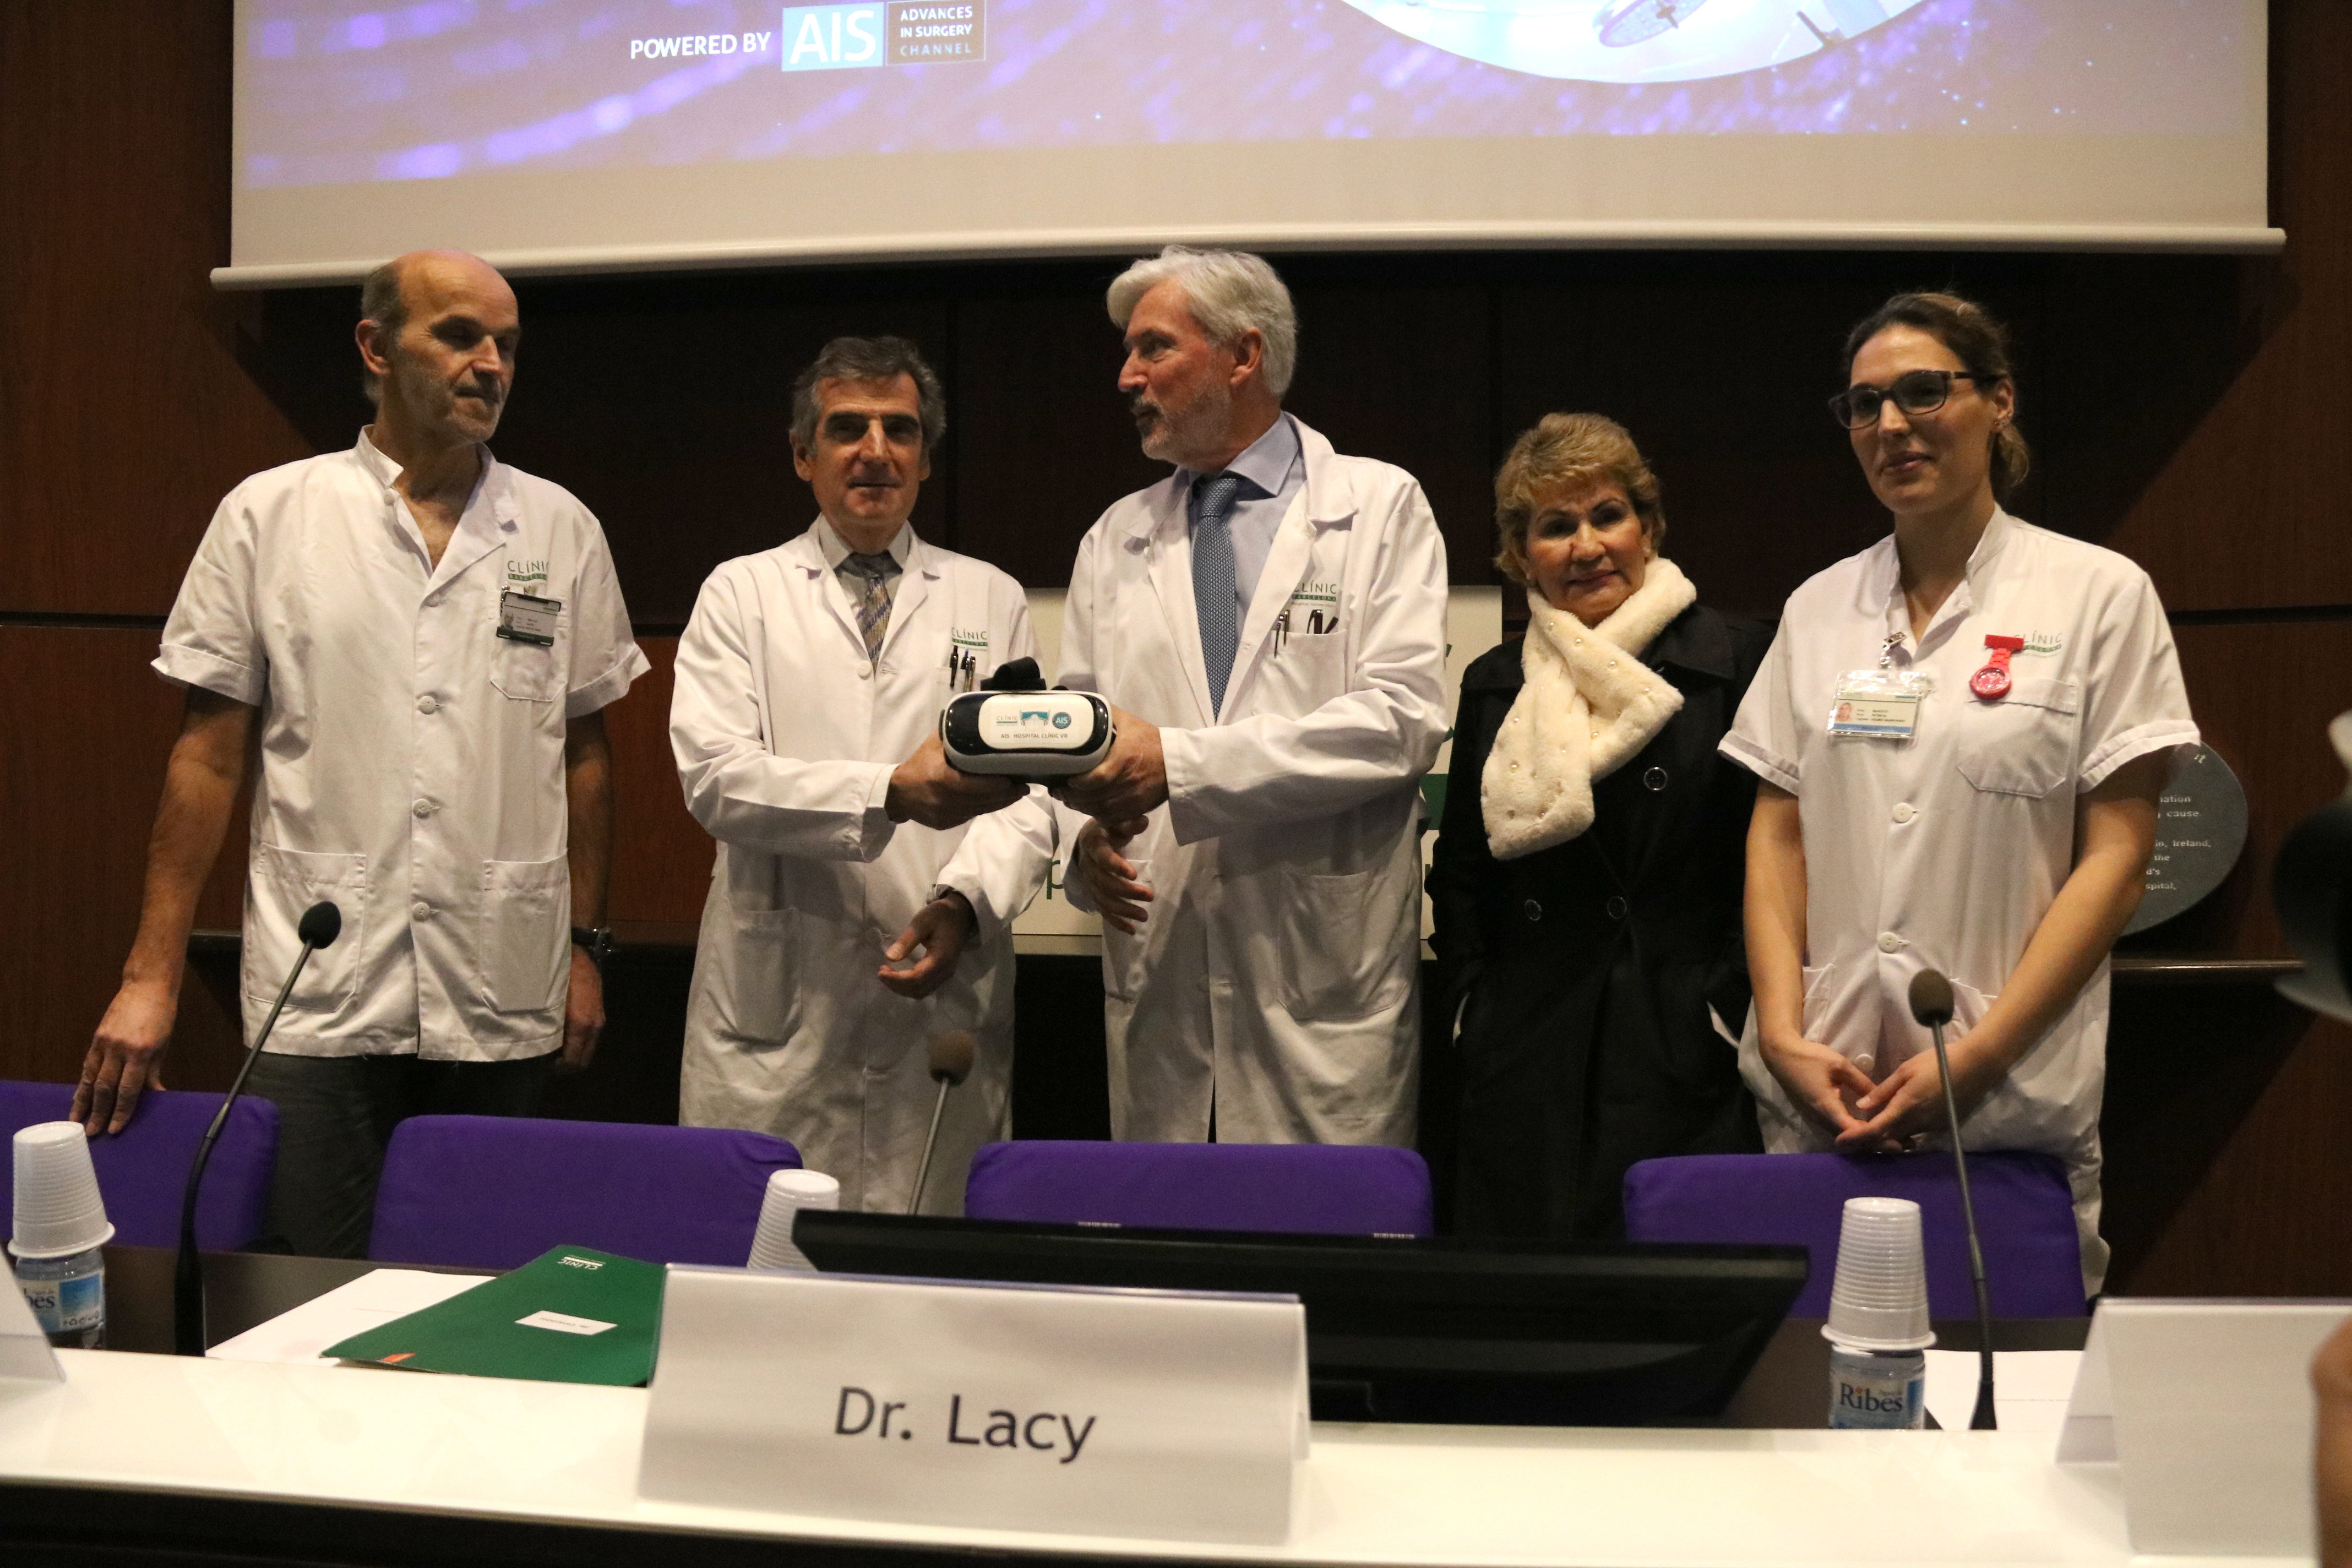 Presentation of virtual reality technology for patients awaiting operation (by ACN)